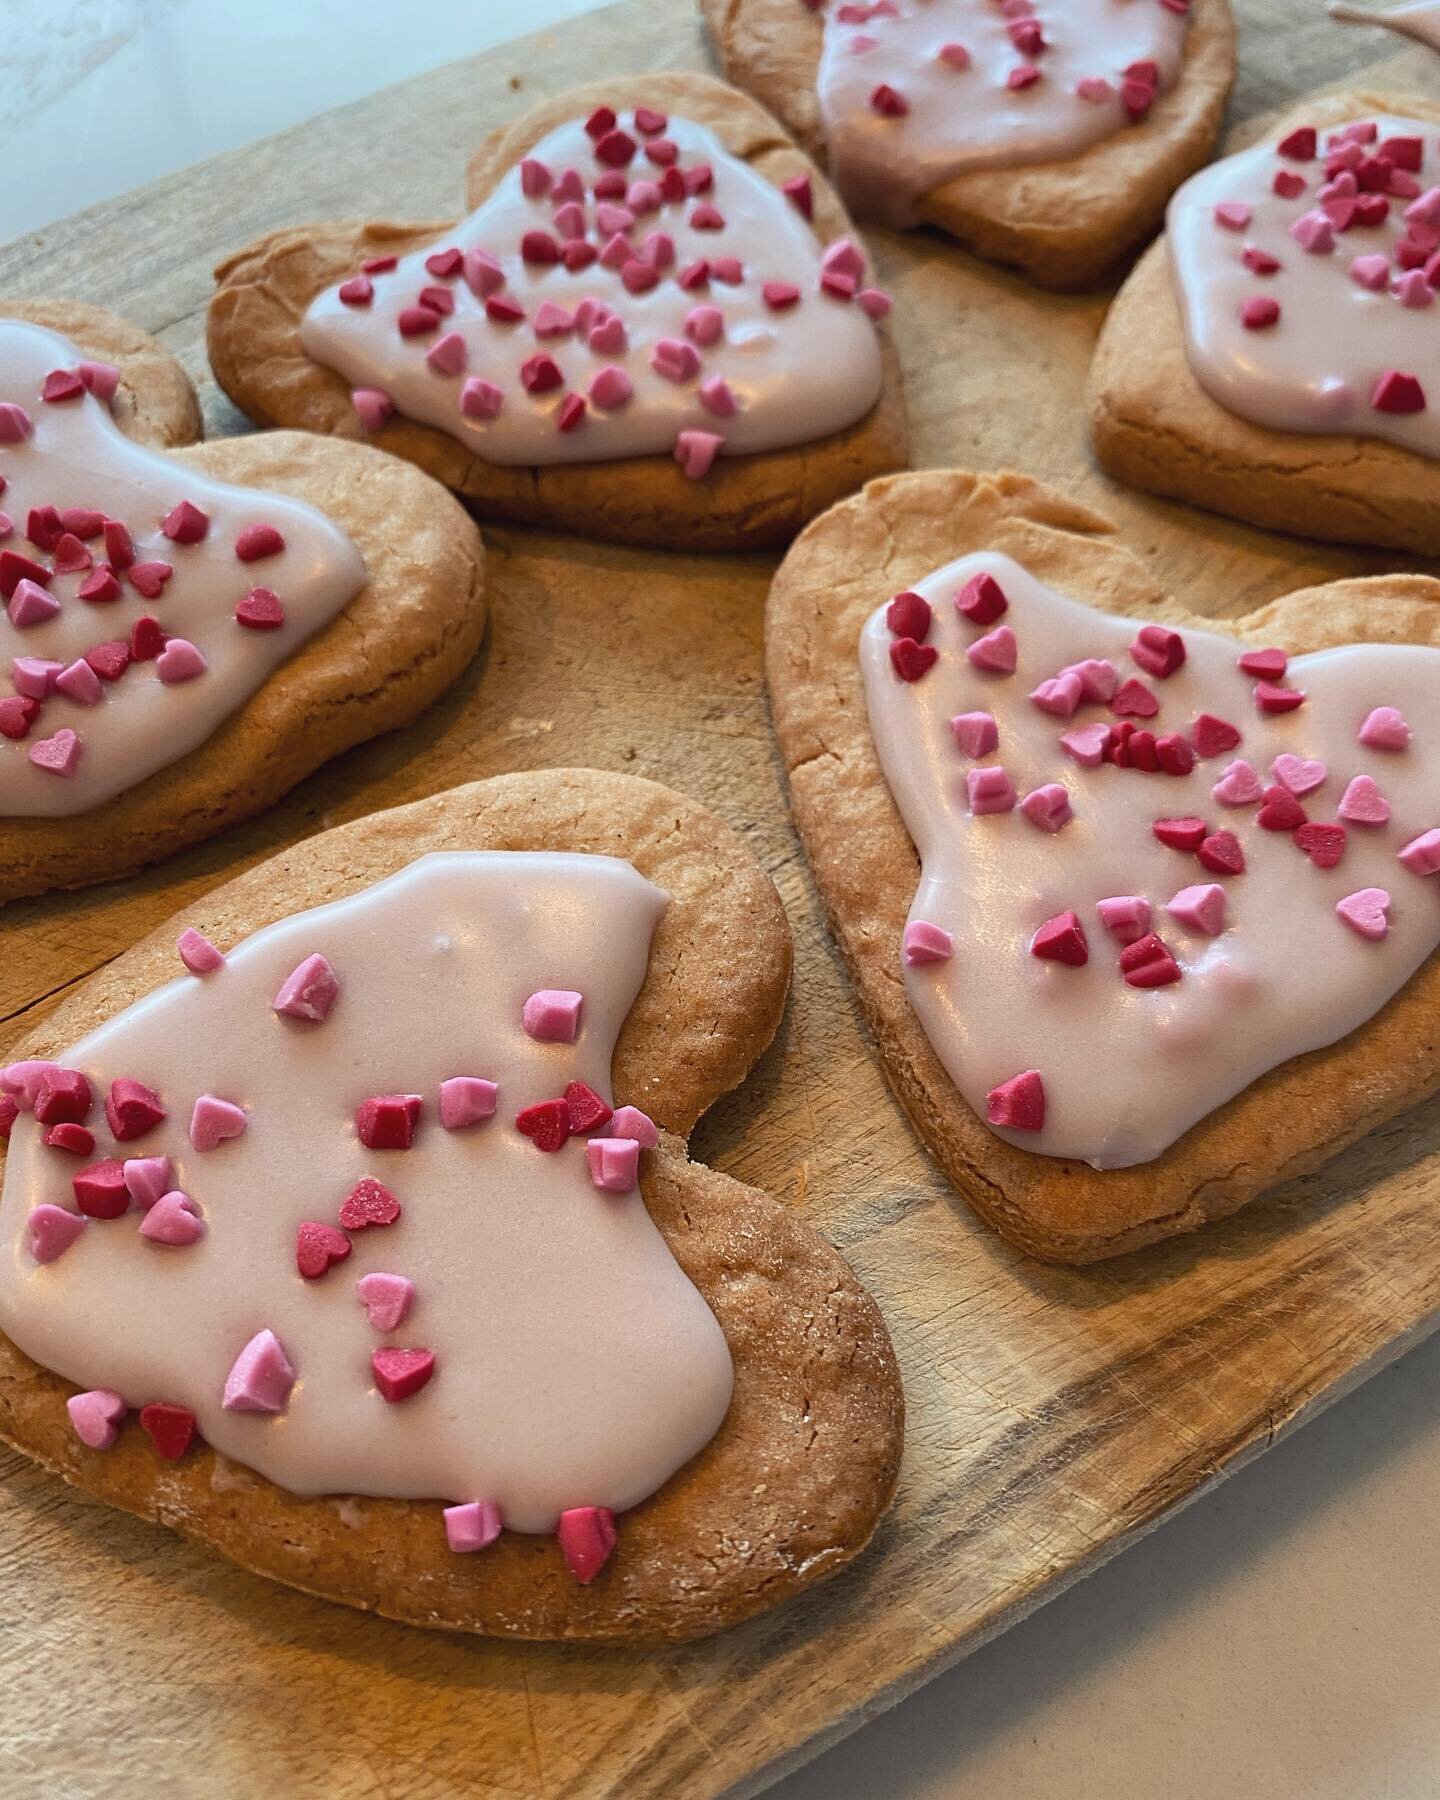 Happy Valentines Day everyone!❤️ Nothing like a bit of toddler baking to make a very big mess😂

Biscuit recipe:
1 egg
180g flour
180g brown sugar
6 tbsp vegetable oil
Vanilla essence 

We made our pink icing with a little icing sugar, water and red 